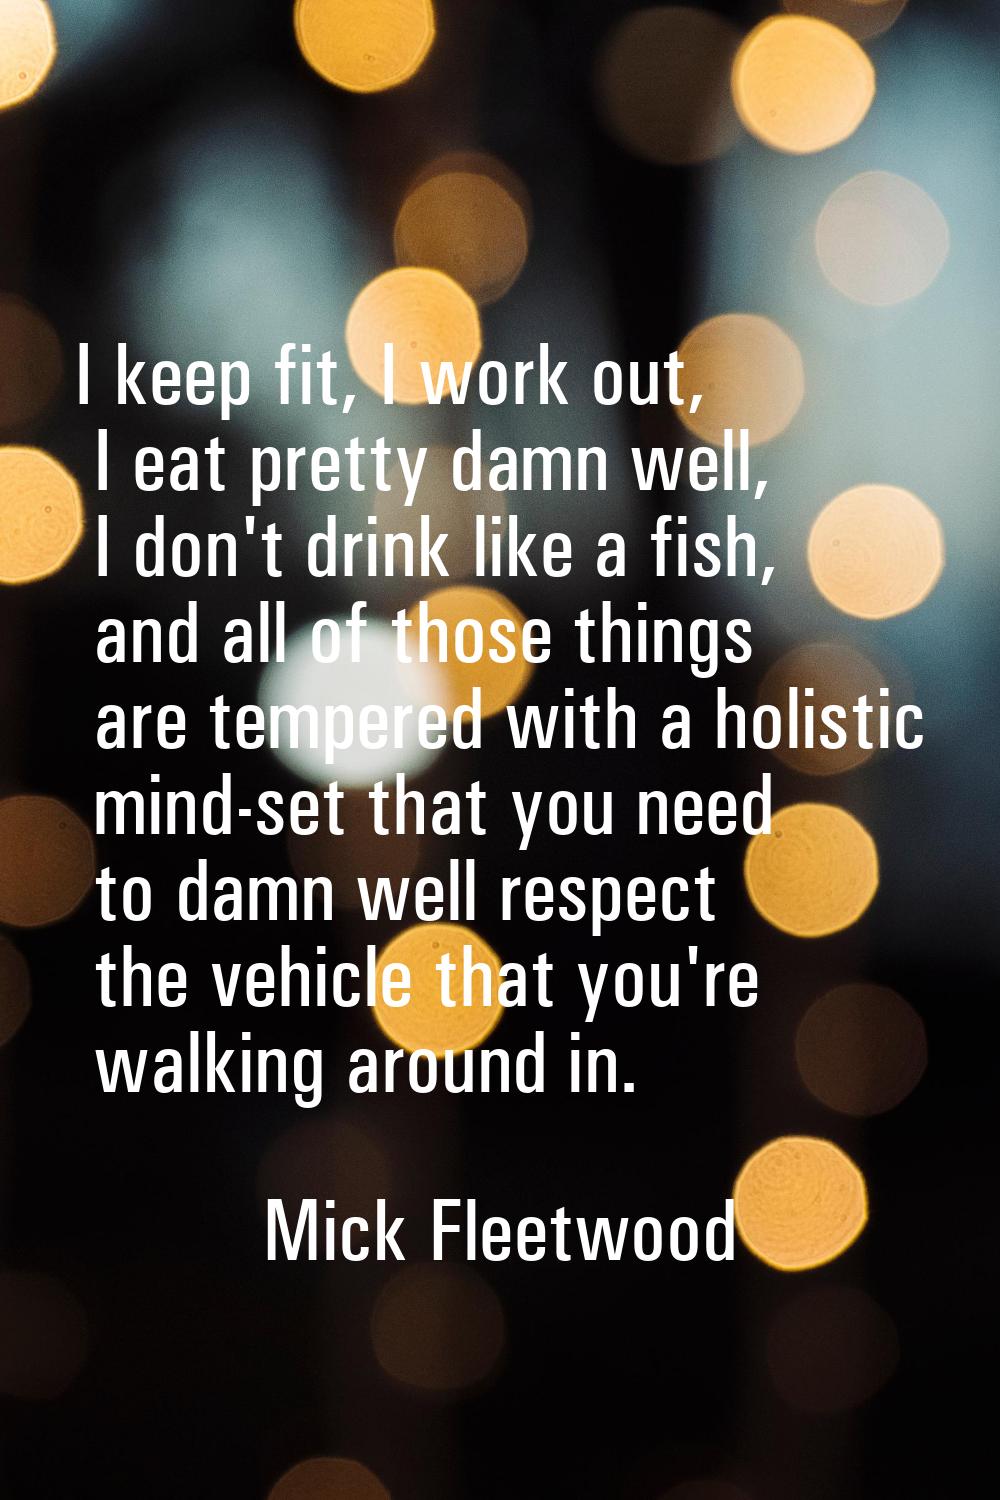 I keep fit, I work out, I eat pretty damn well, I don't drink like a fish, and all of those things 